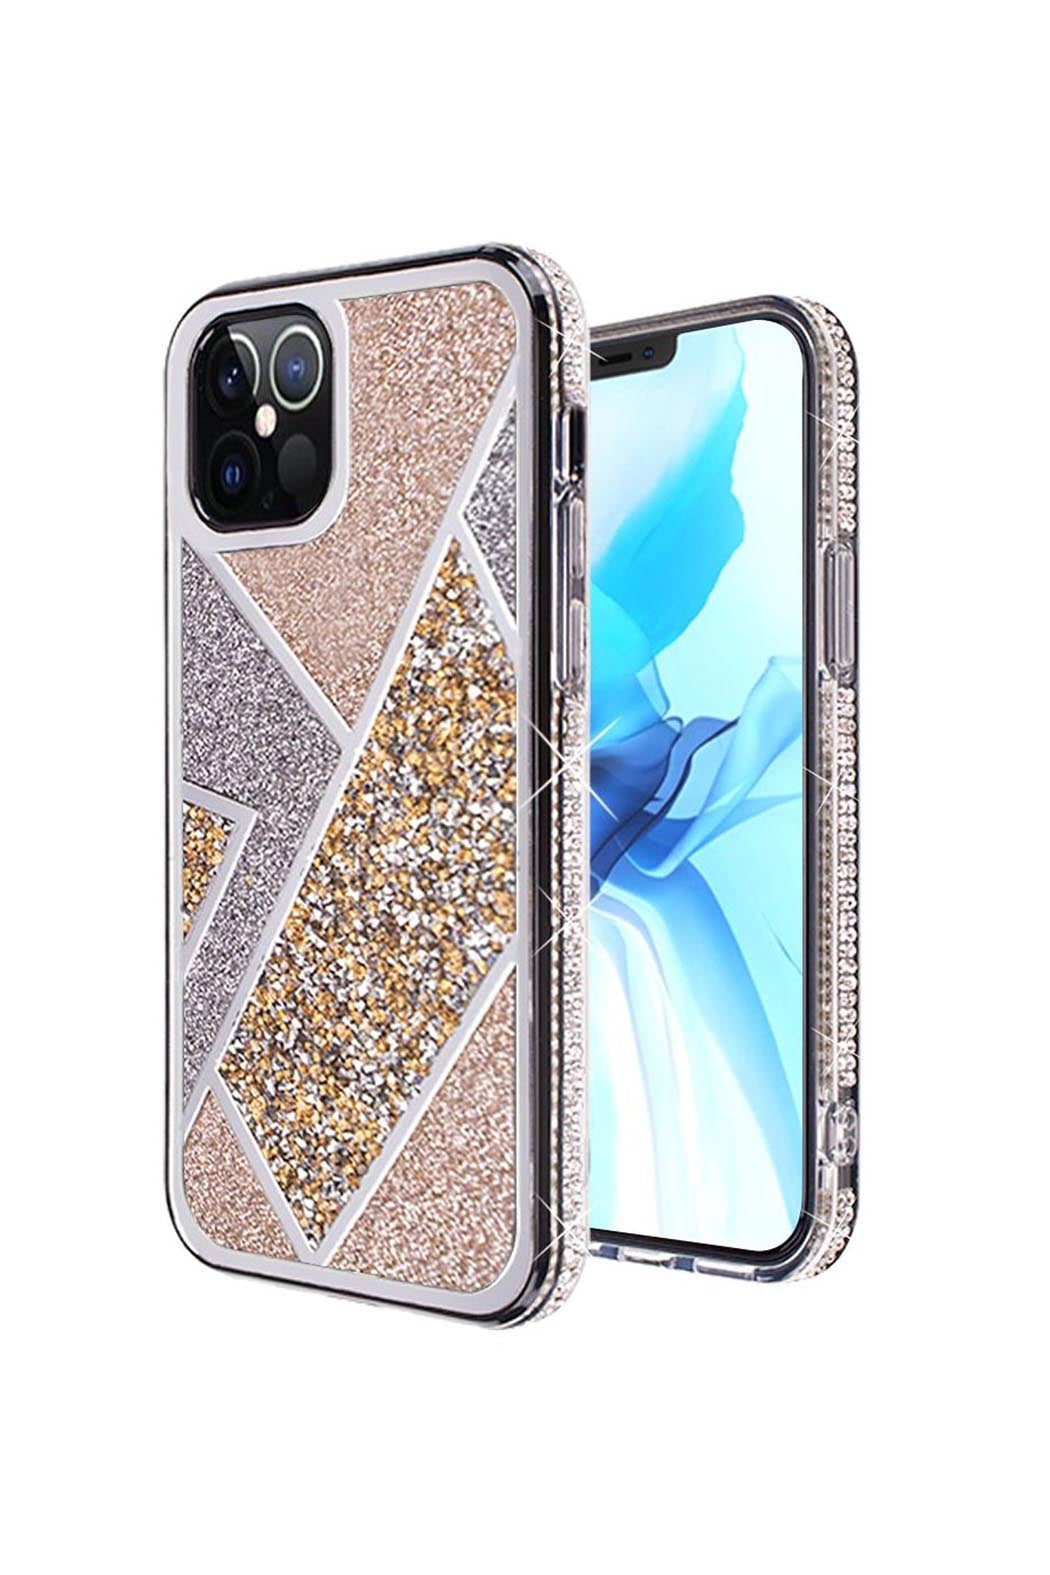 FOR iPHONE 12 PRO MAX 6.7 RHOMBUS BLING GLITTER DIAMOND CASE COVER